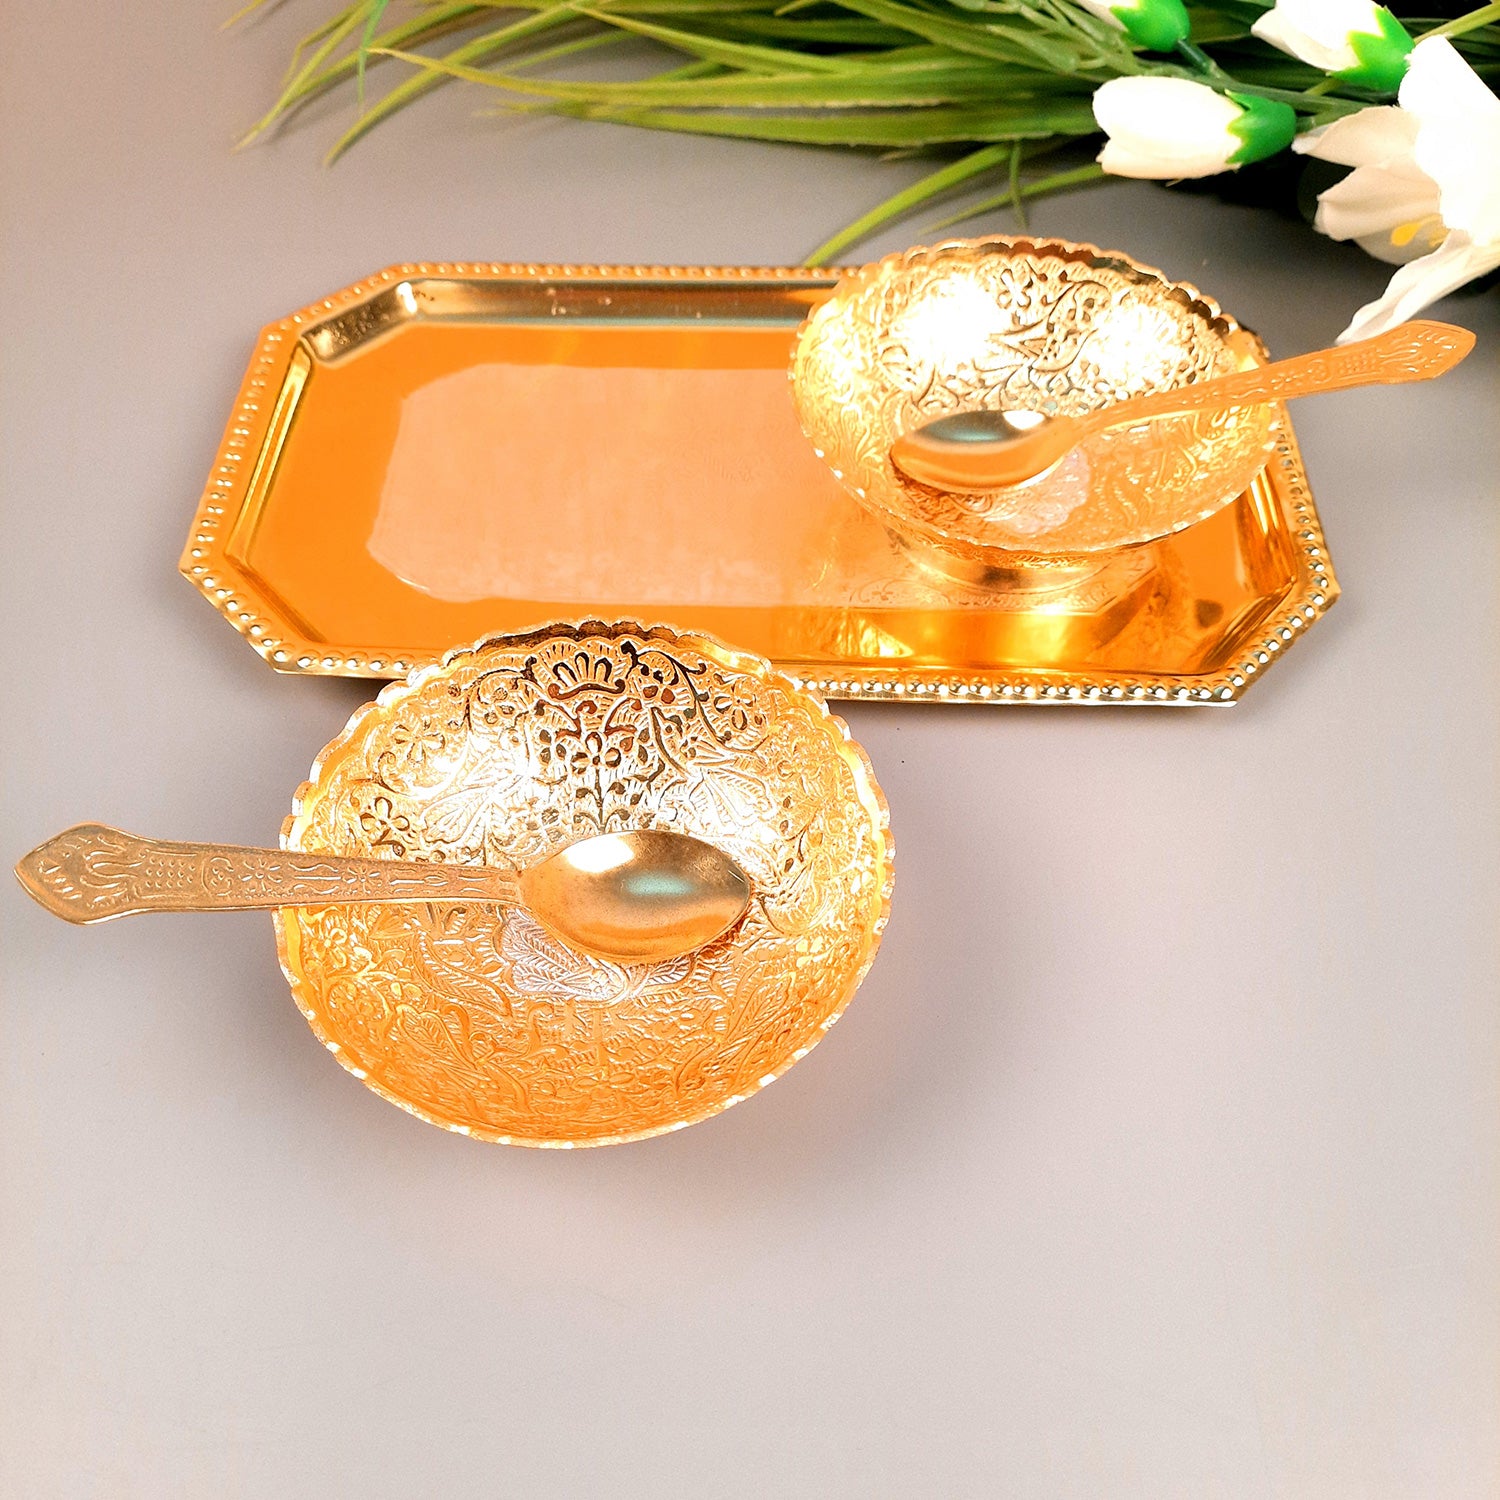 Dessert Bowls with Tray, Spoons & Gift Box | Dry Fruit/Mukhwas Serving Tray with Bowl - for Dining Table, Home & Kitchen Decor | Wedding, Housewarming & Diwal Gift Set - Apkamart